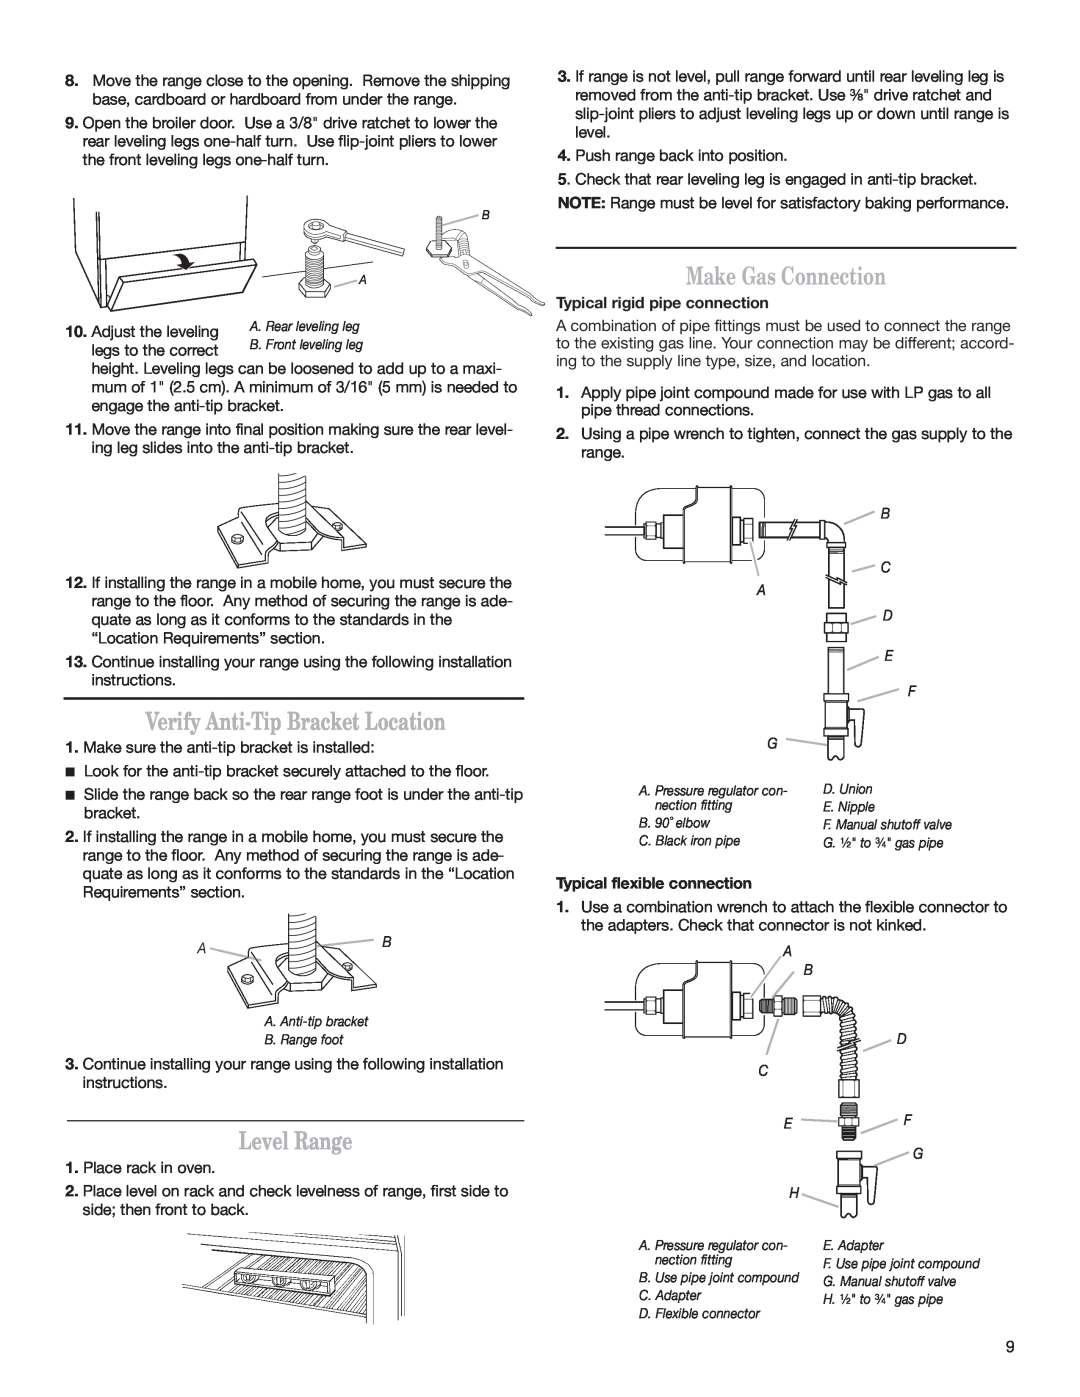 Whirlpool W10130752A Verify Anti-Tip Bracket Location, Level Range, Make Gas Connection, Typical flexible connection 